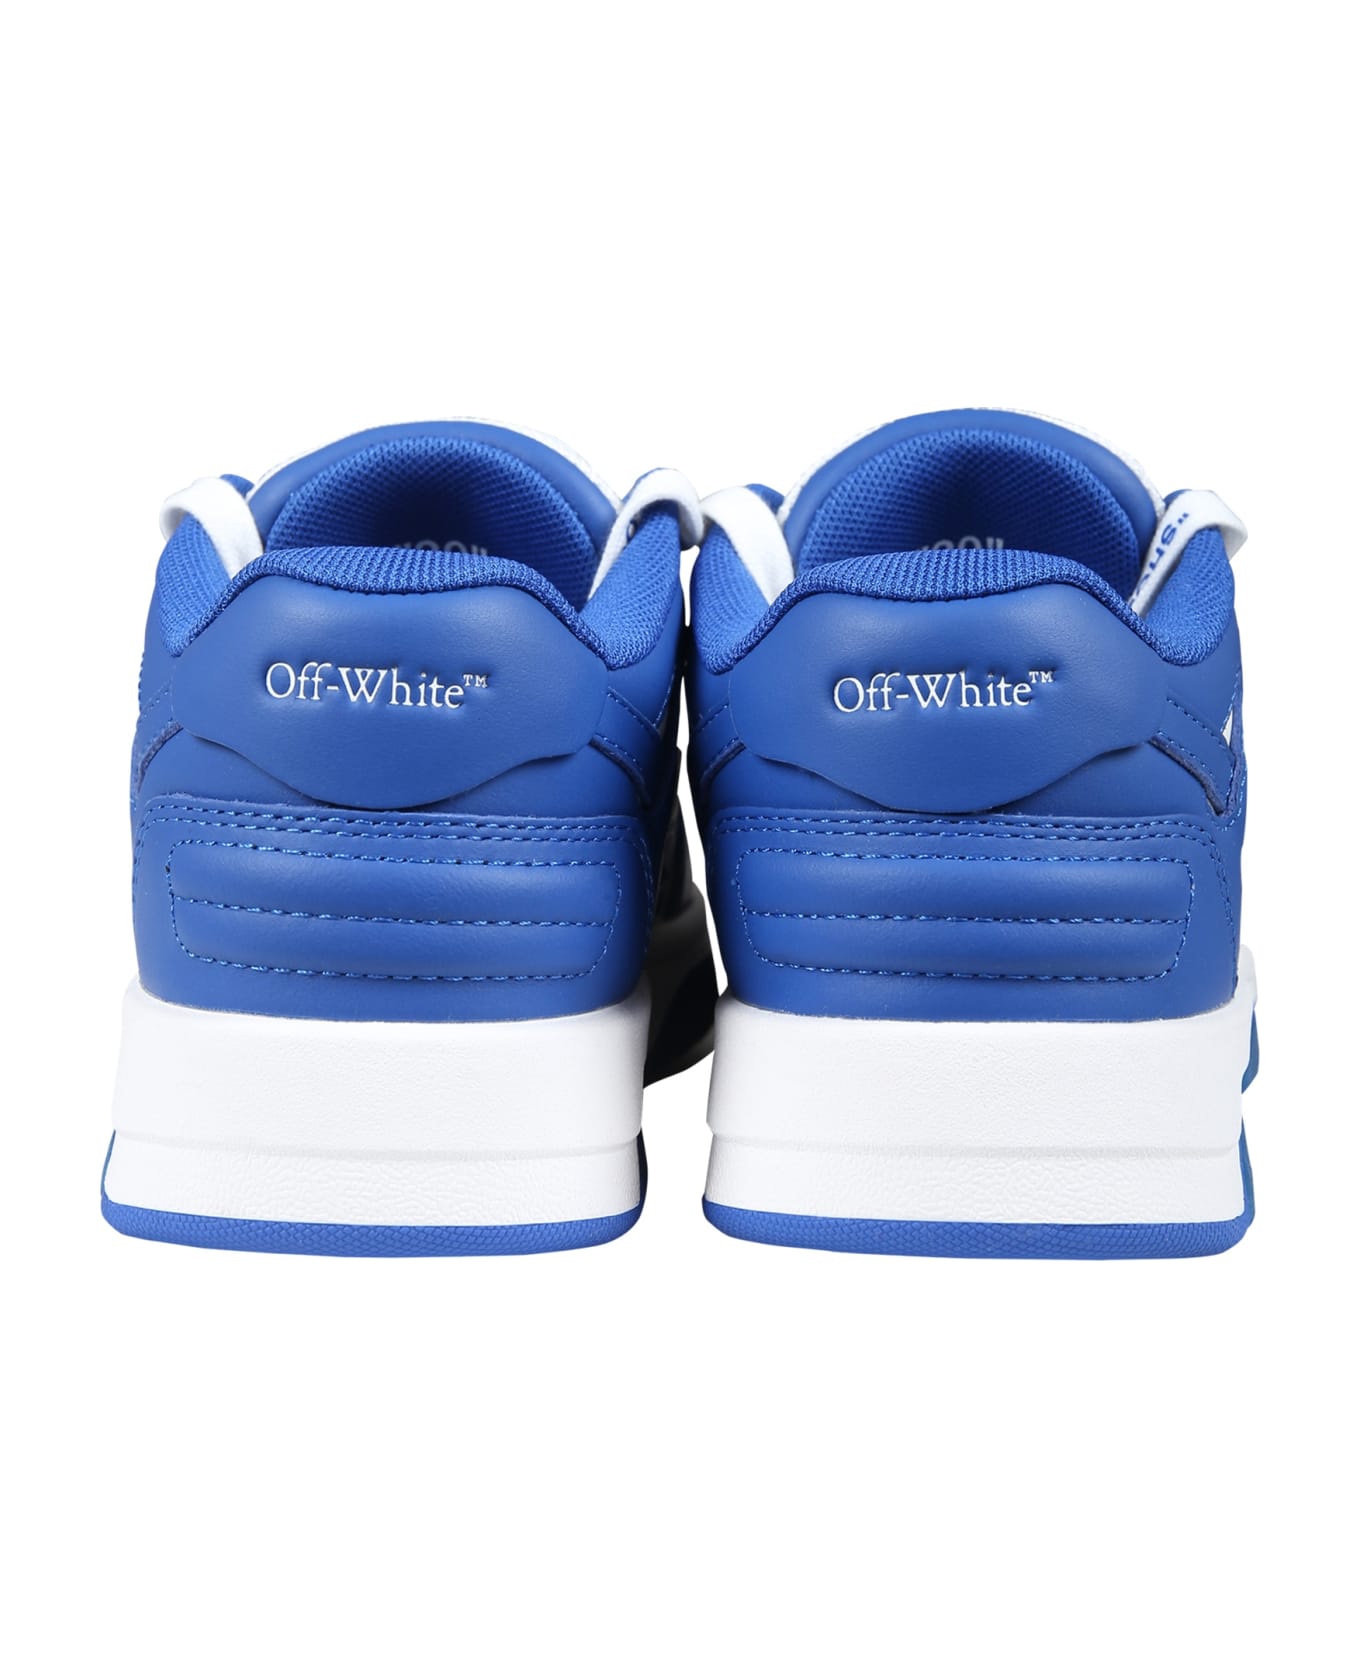 Off-White Light Blue Sneakers For Boy With Arrows - Light Blue